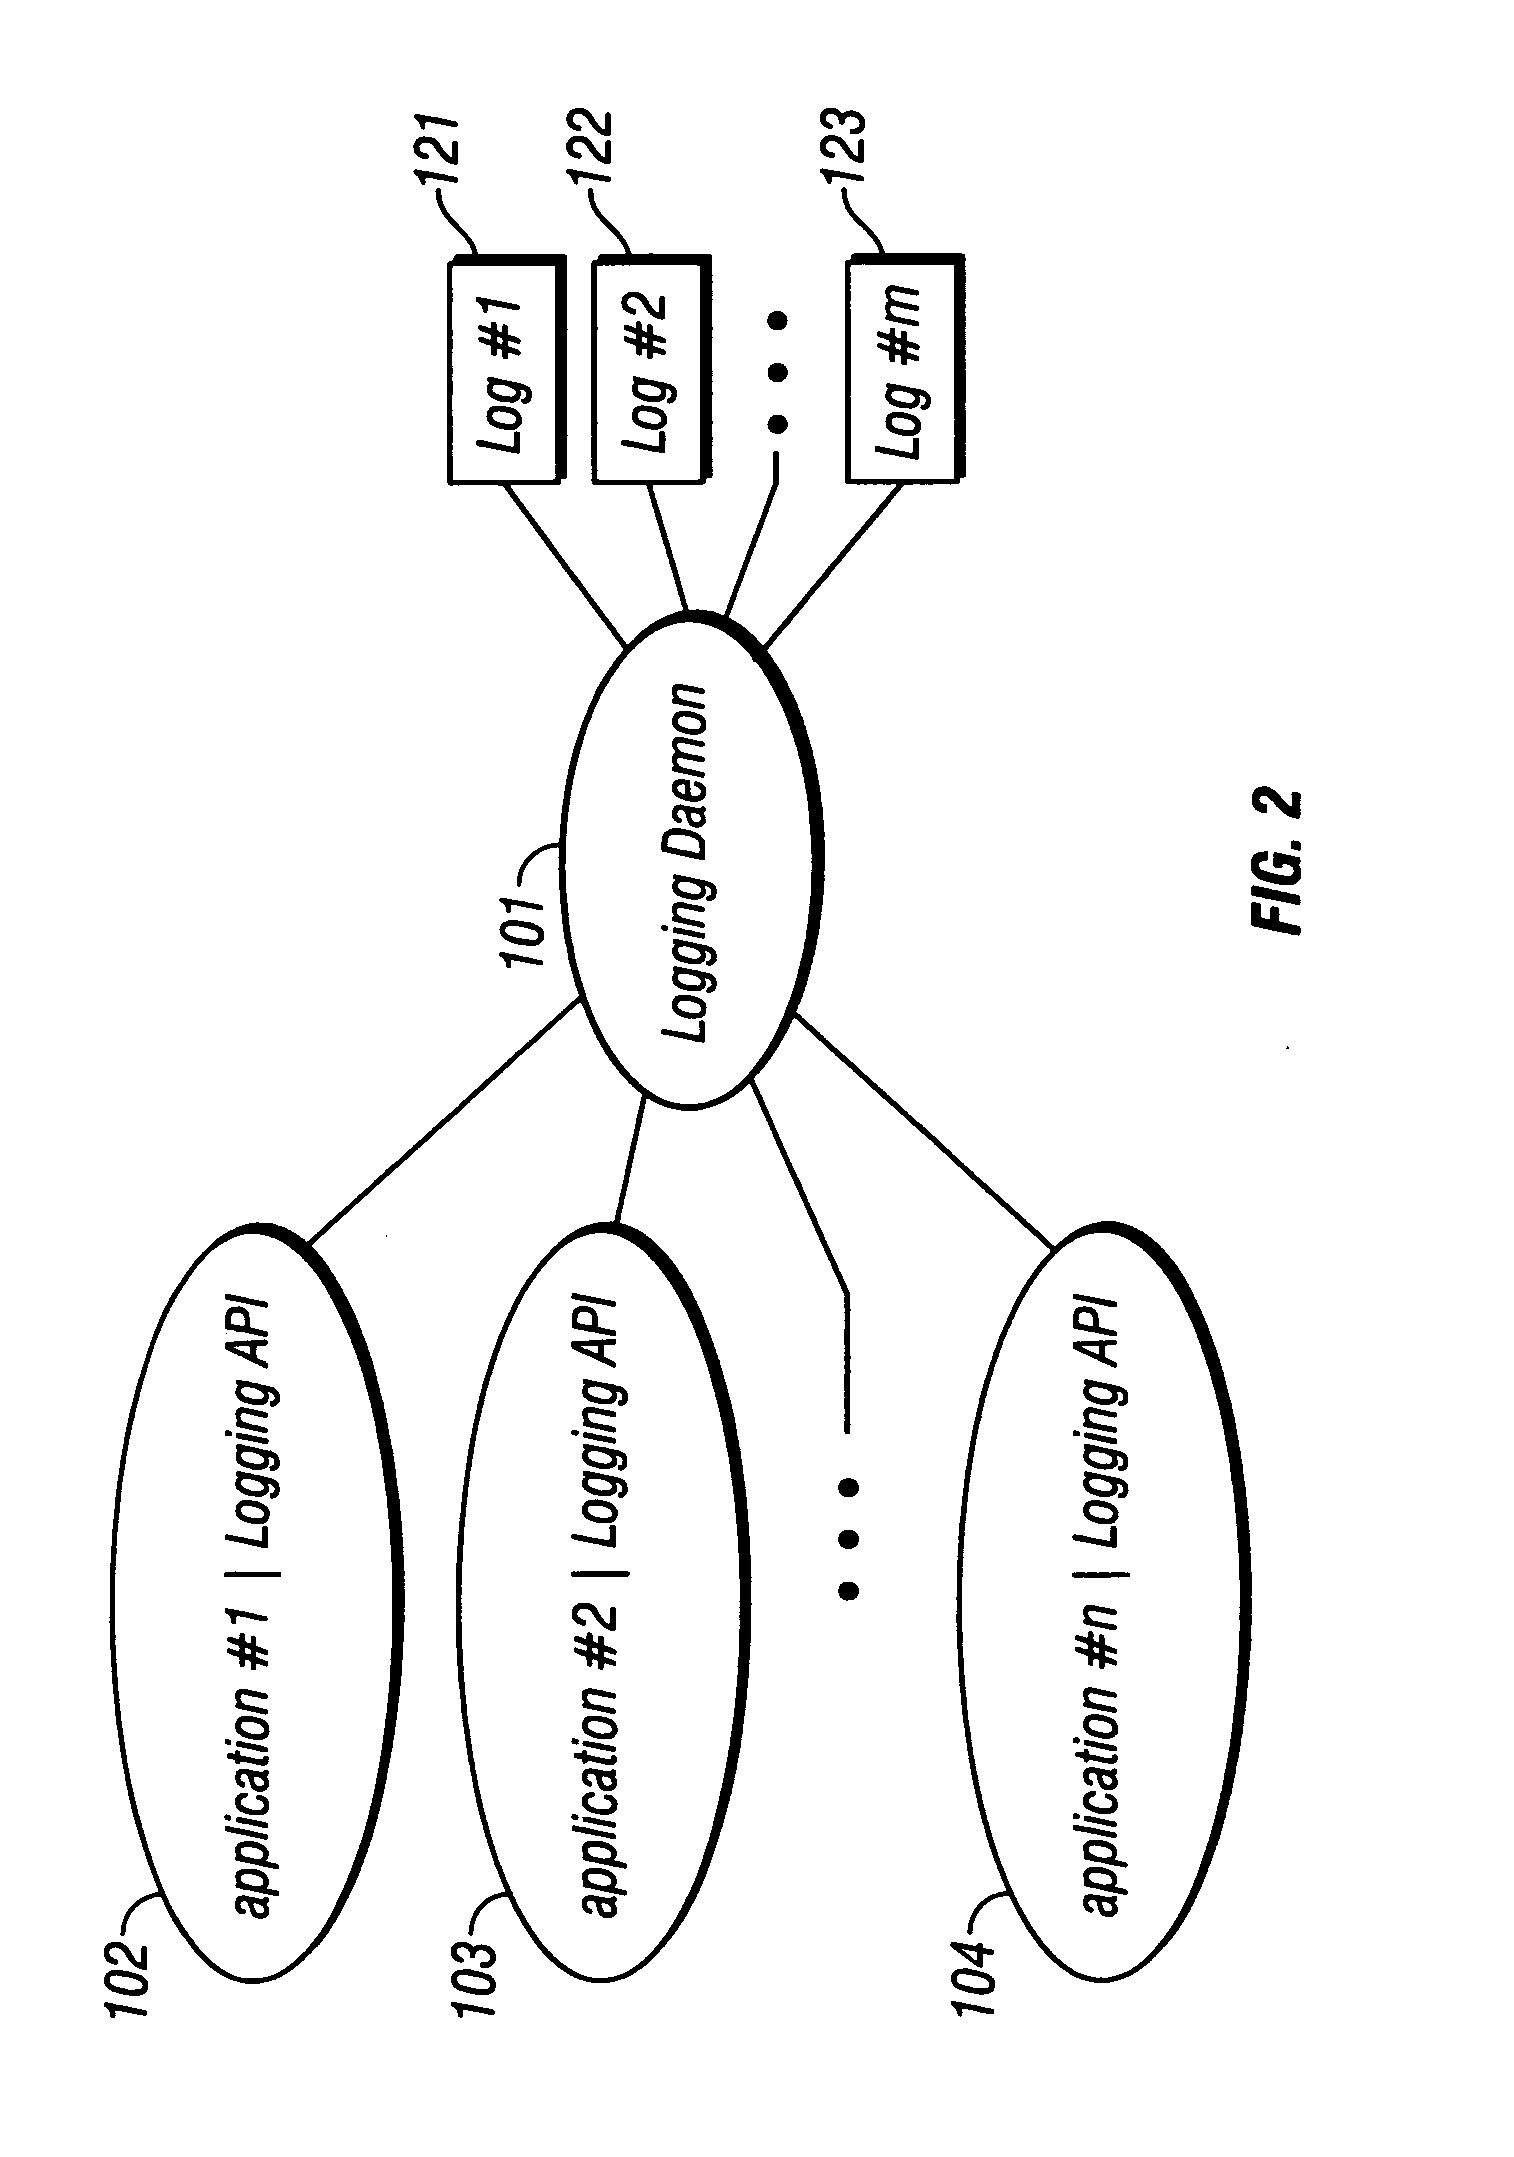 Parsing computer system logging information collected by common logging